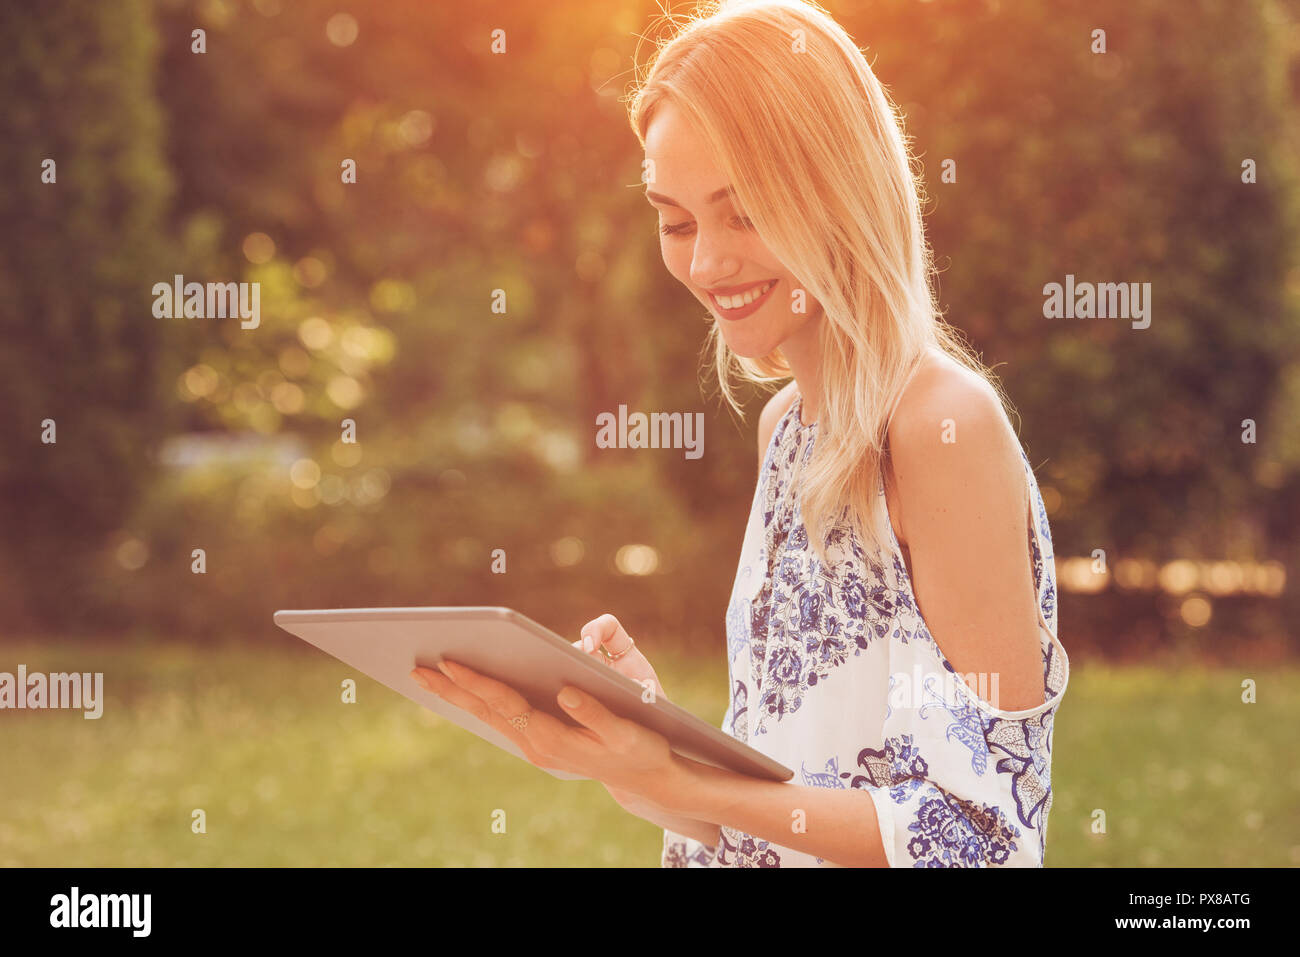 Beautiful Young Woman is using an app in her tablet pc device to read email, receive text, write a message or browse the internet while outdoors Stock Photo